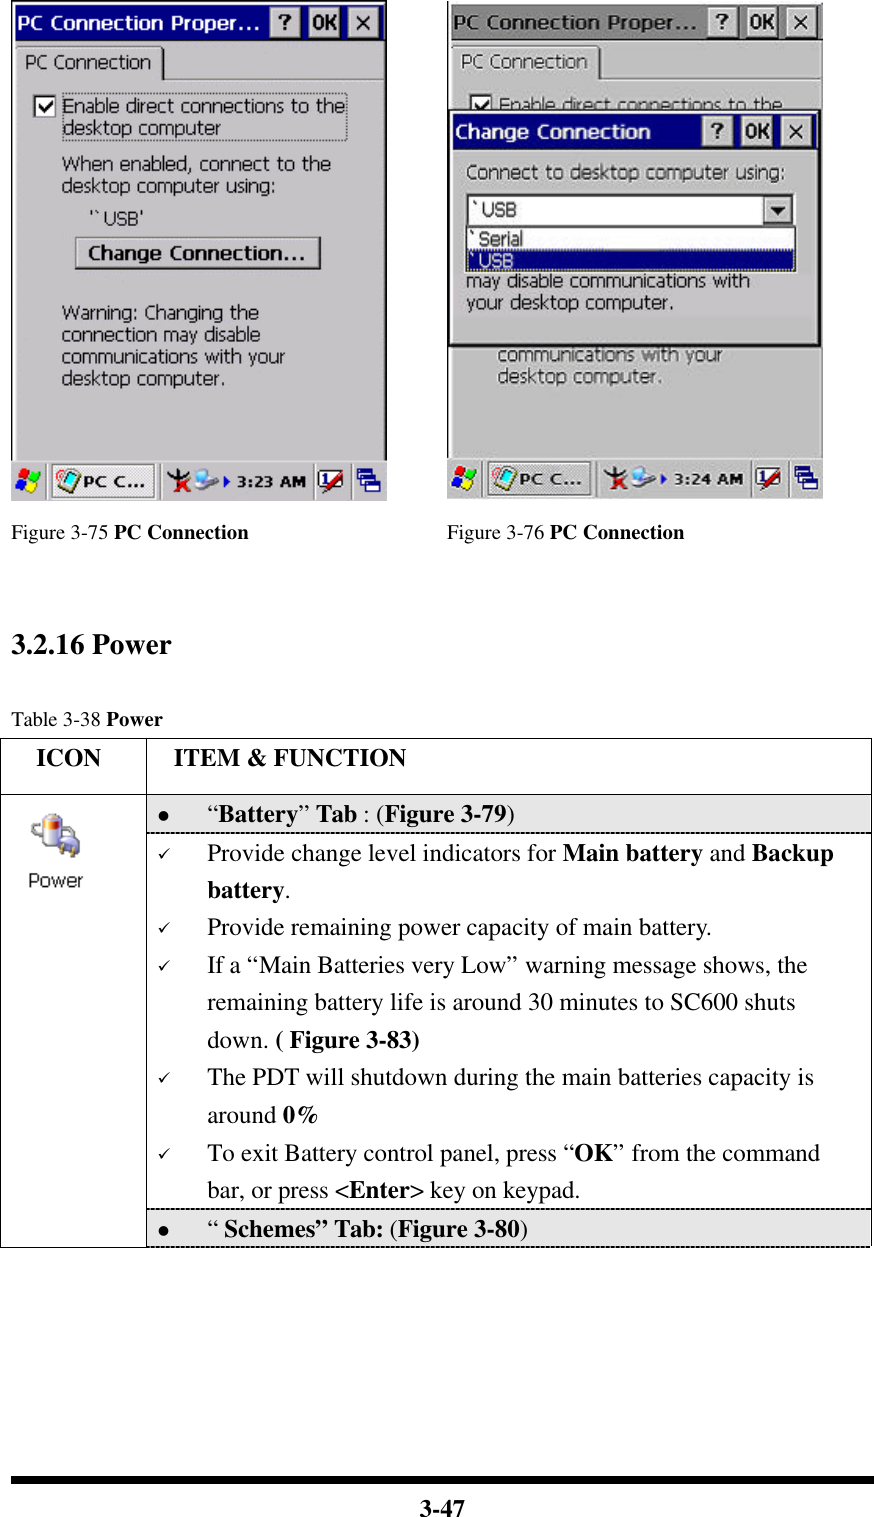  3-47   Figure 3-75 PC Connection Figure 3-76 PC Connection   3.2.16 Power  Table 3-38 Power   ICON  ITEM &amp; FUNCTION l “Battery” Tab : (Figure 3-79) ü Provide change level indicators for Main battery and Backup battery. ü Provide remaining power capacity of main battery. ü If a “Main Batteries very Low” warning message shows, the remaining battery life is around 30 minutes to SC600 shuts down. ( Figure 3-83) ü The PDT will shutdown during the main batteries capacity is around 0% ü To exit Battery control panel, press “OK” from the command bar, or press &lt;Enter&gt; key on keypad.  l “ Schemes” Tab: (Figure 3-80) 